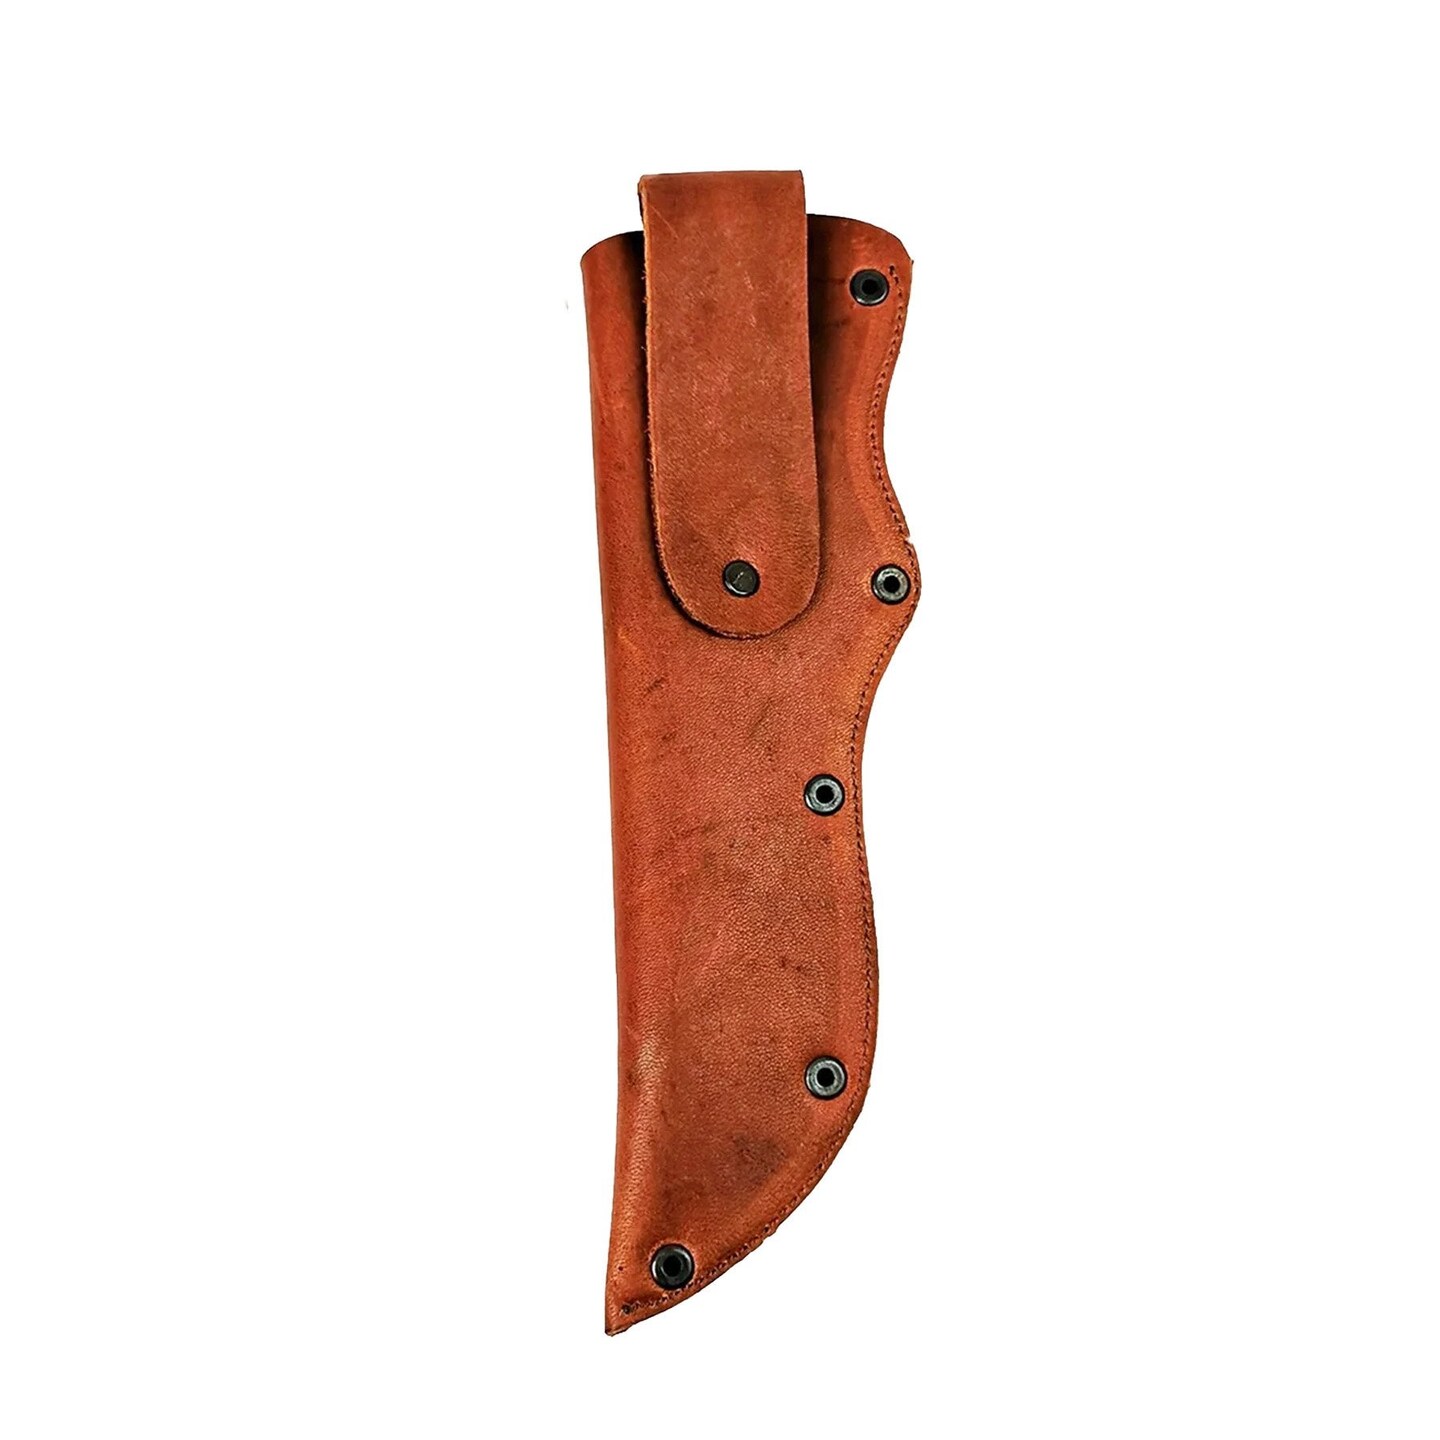 ELW Full Grain Leather Mora Knife Sheath with Belt Loop - Protect Fixed Blade  Knives for Outdoor Hunting, Bushcraft Camping, Hiking, BBQ, & Outdoor  Activities Dark Brown 